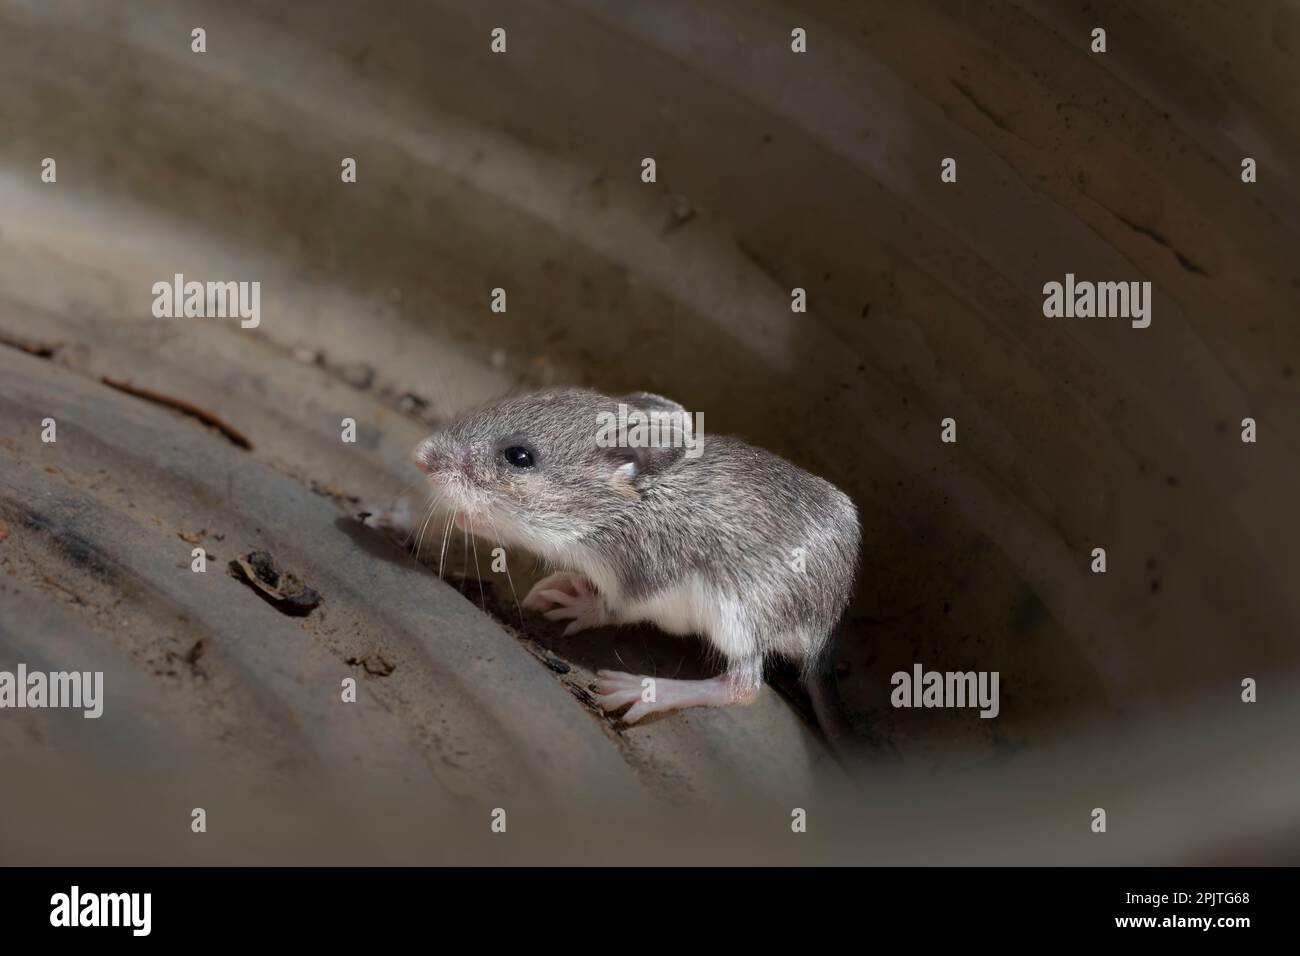 The house mouse (Mus musculusa) Few days old young house mouse. Stock Photo